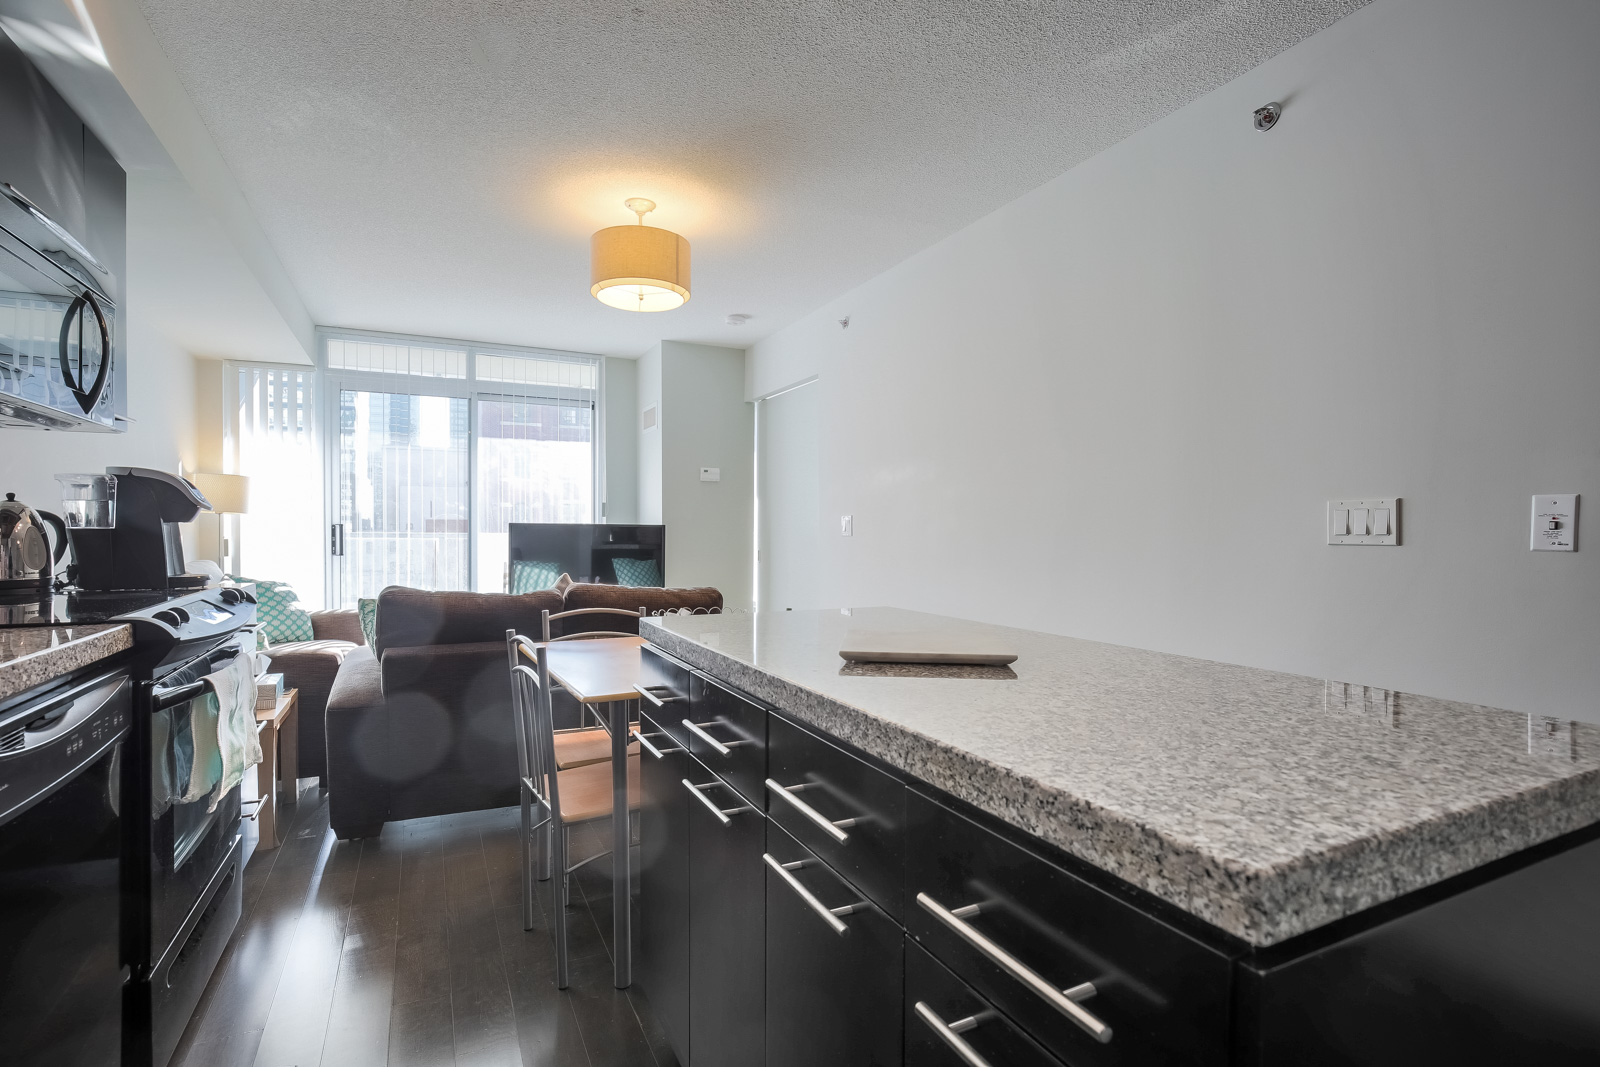 A view of the condo's granite counter-tops and kitchen island